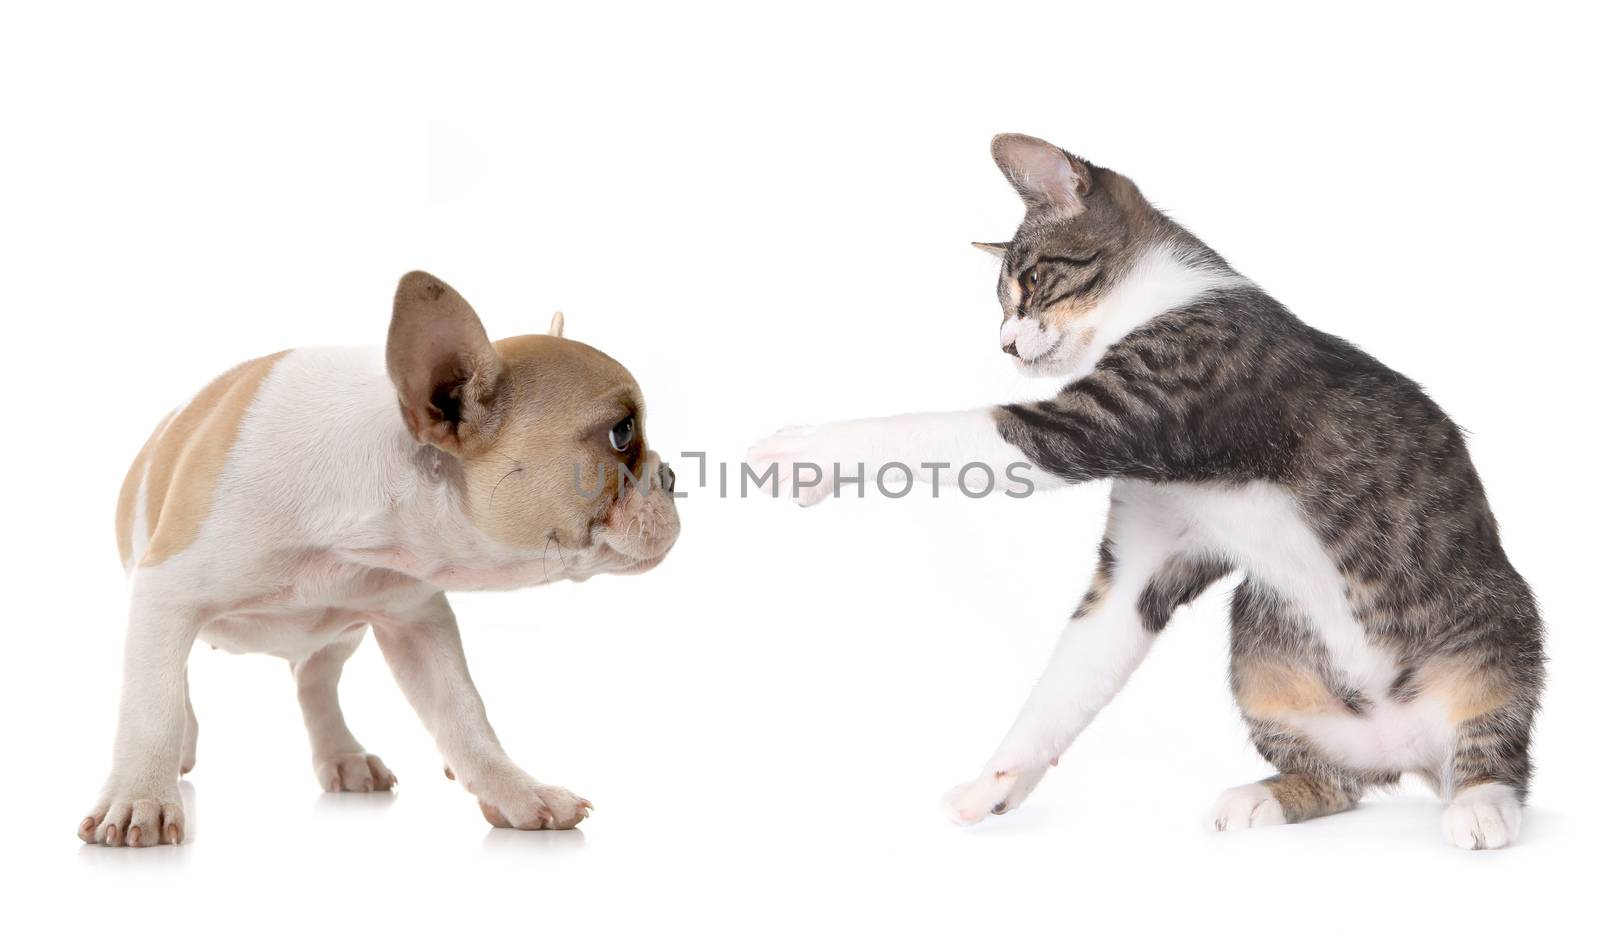 Playful Puppy Dog and Kitten on White Background 